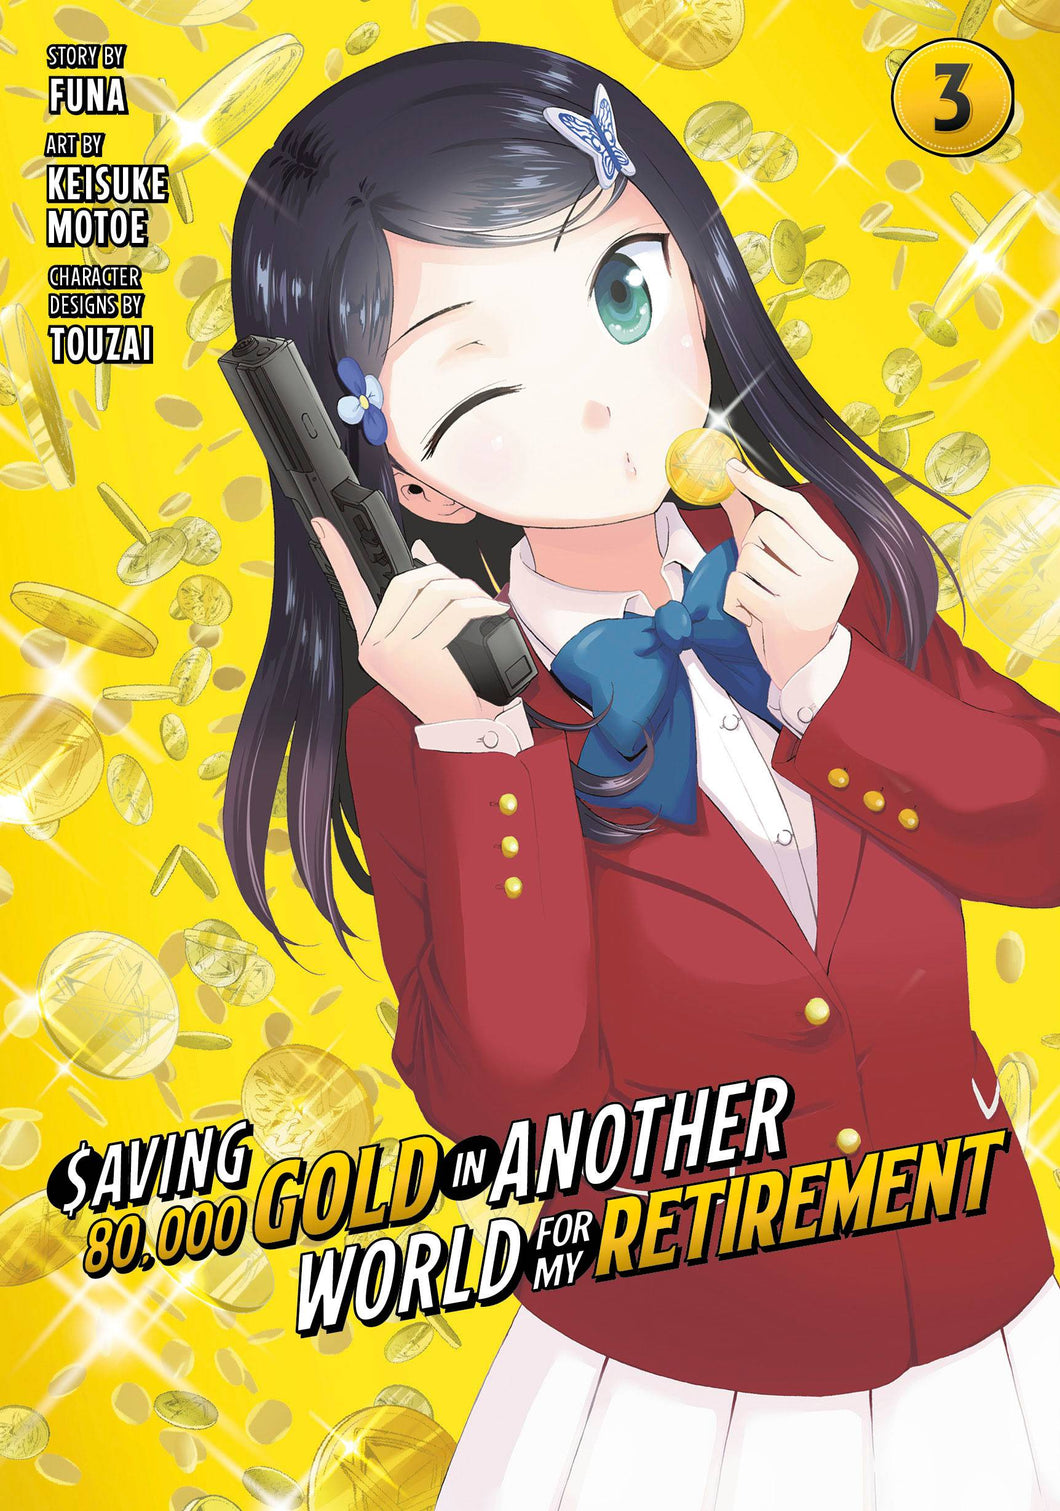 Saving 80,000 Gold in Another World for My Retirement Manga Volume 3